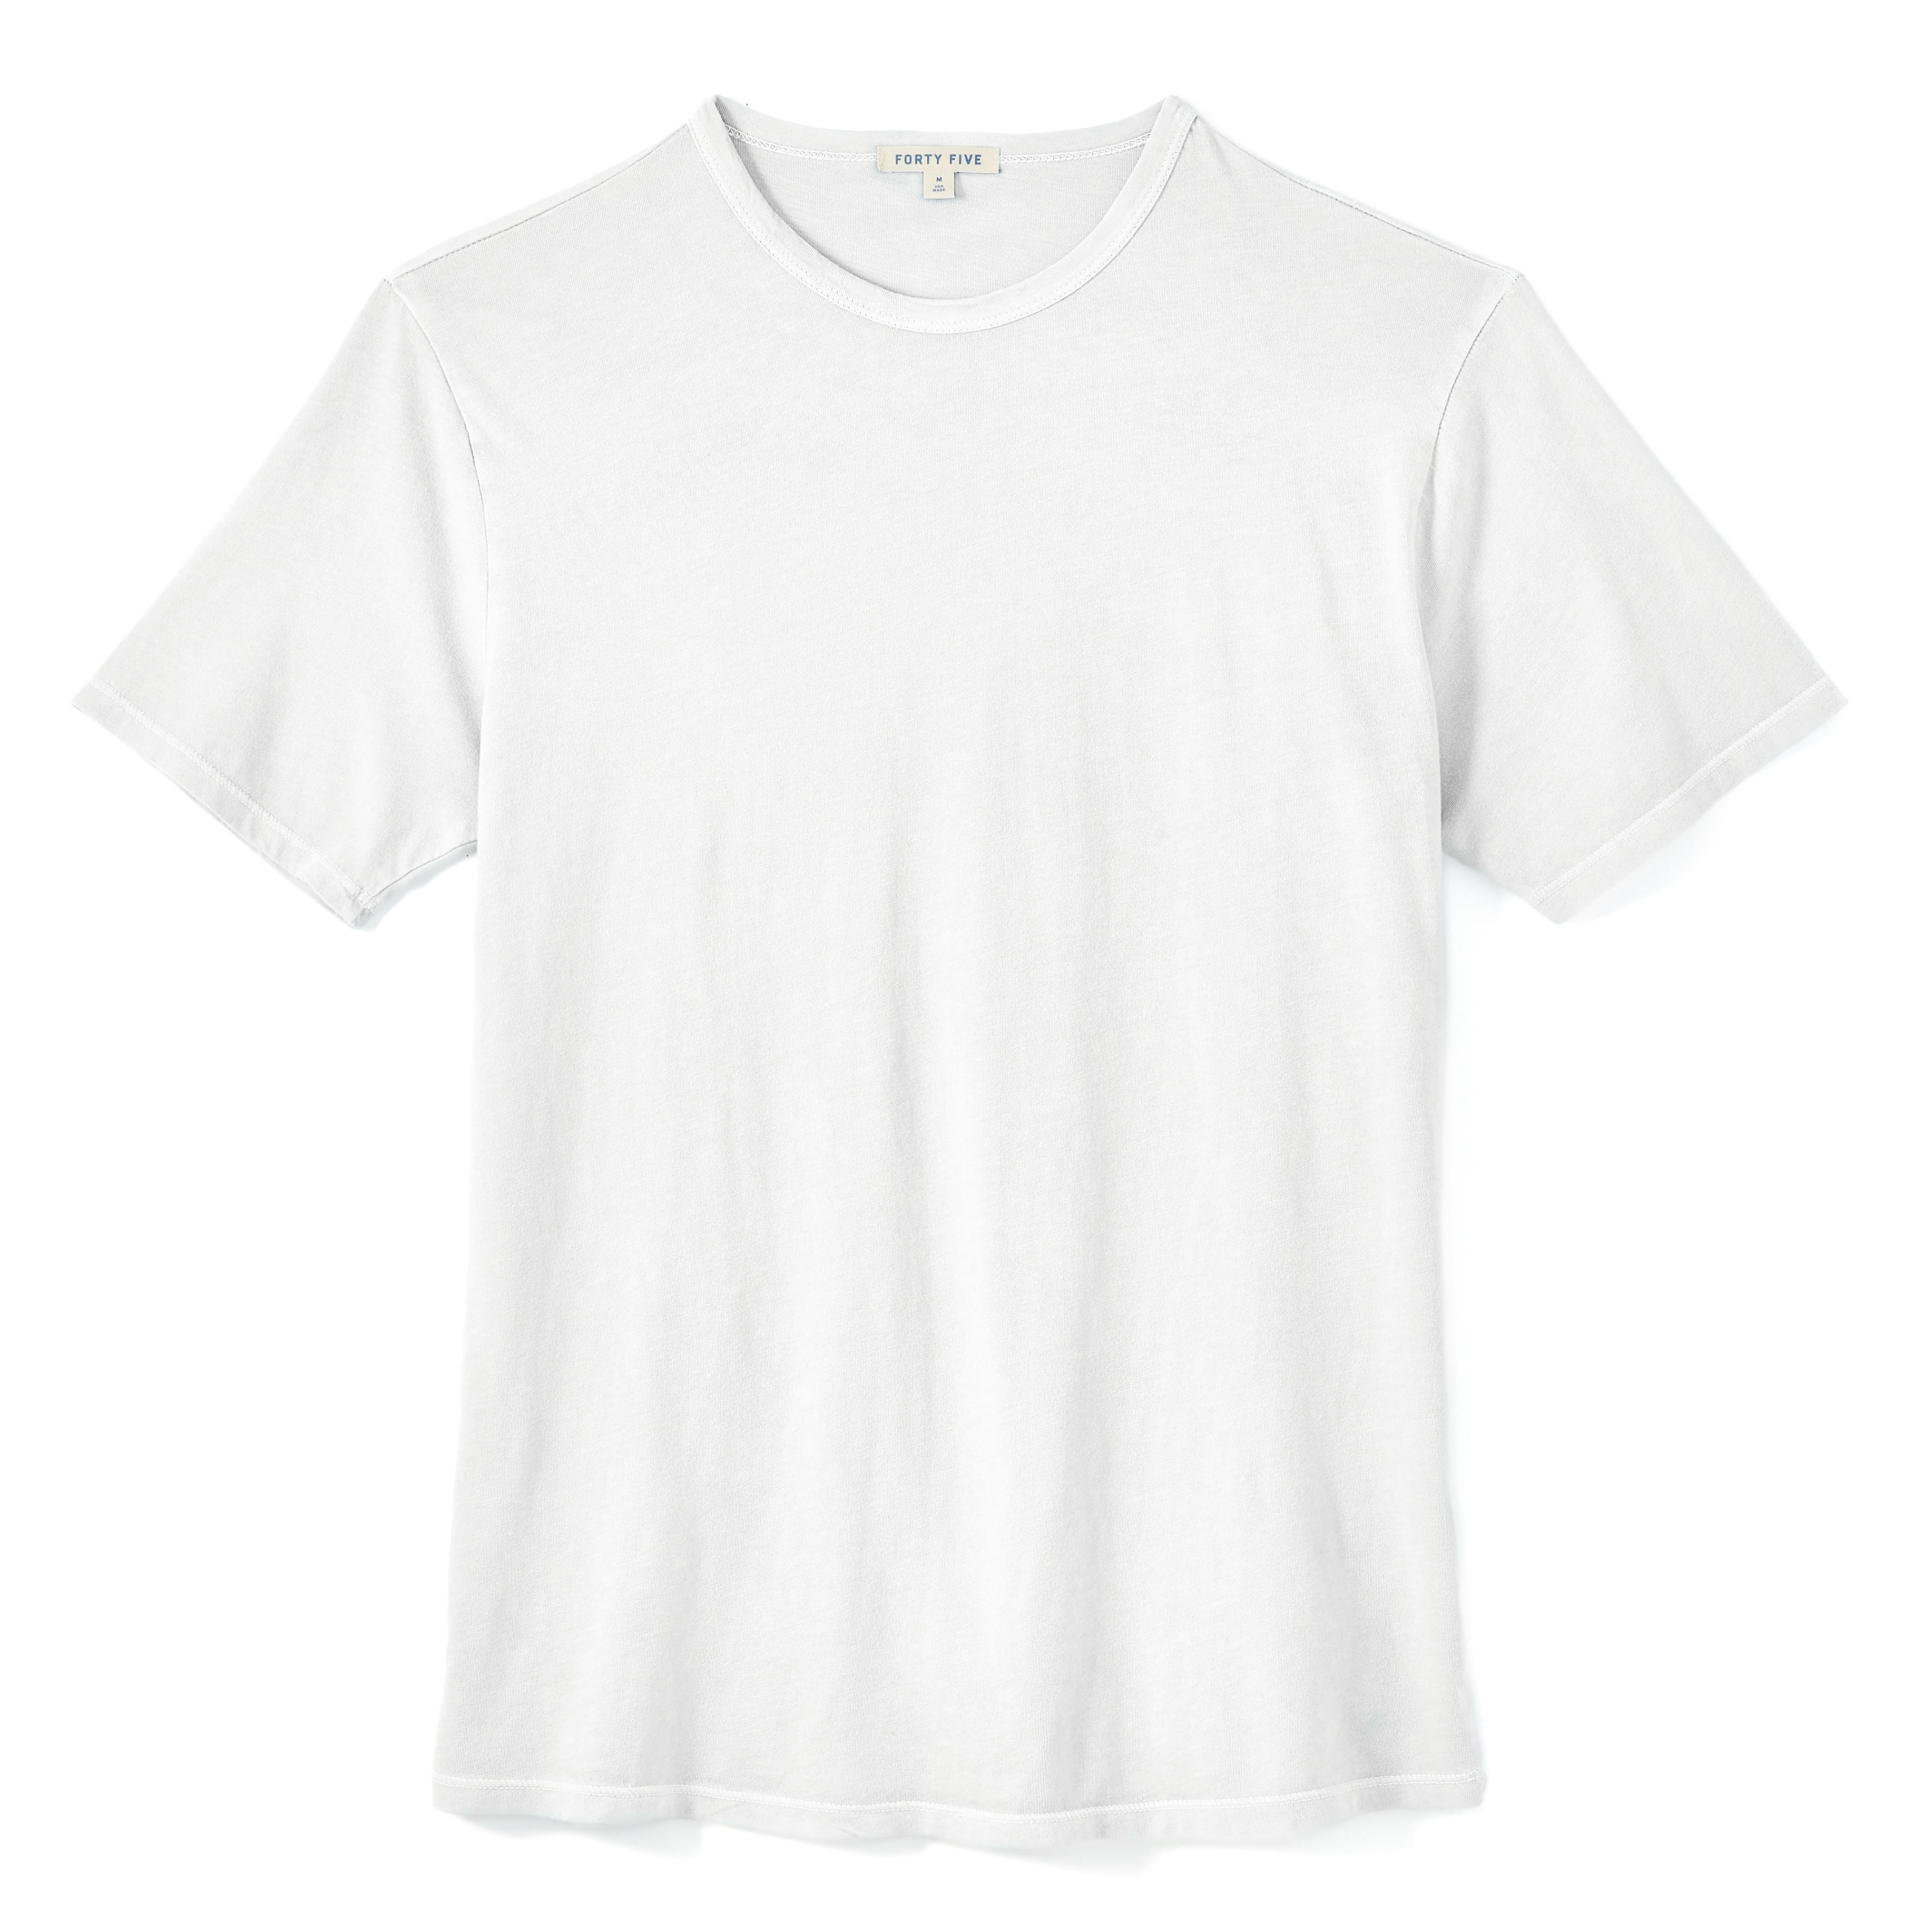 James Perse Combed Cotton-jersey T-Shirt - Men - White T-shirts - S